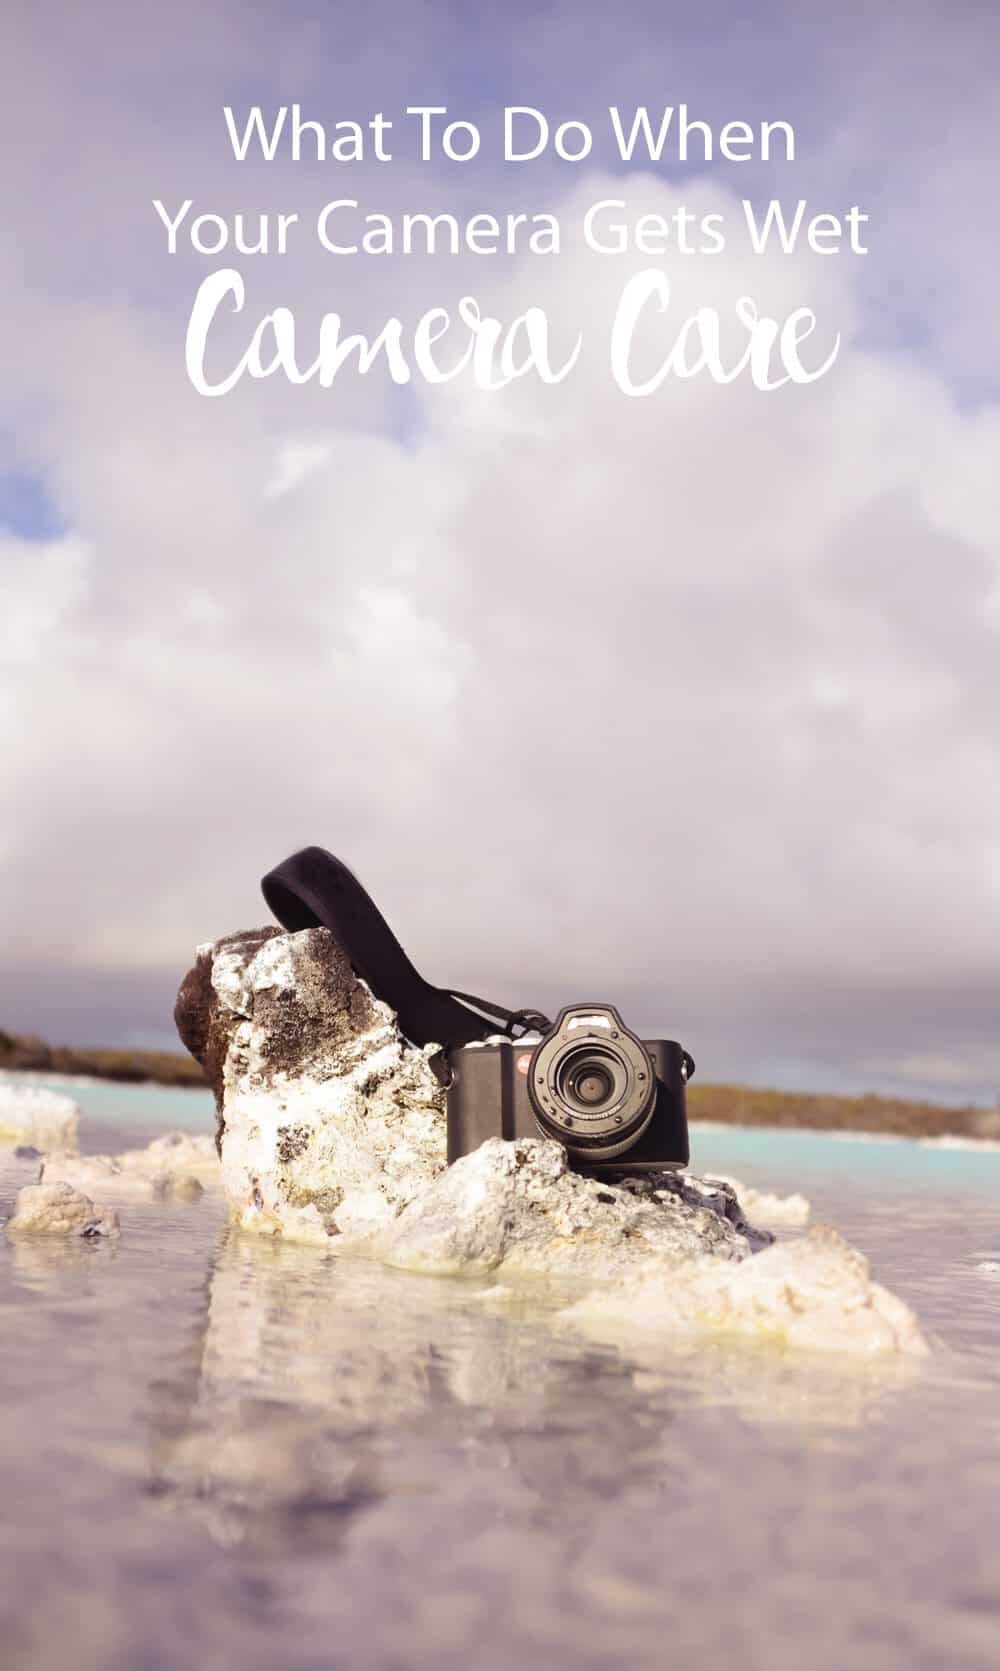 What to do when your camera gets wet - a step by step guide by The Wandering Lens